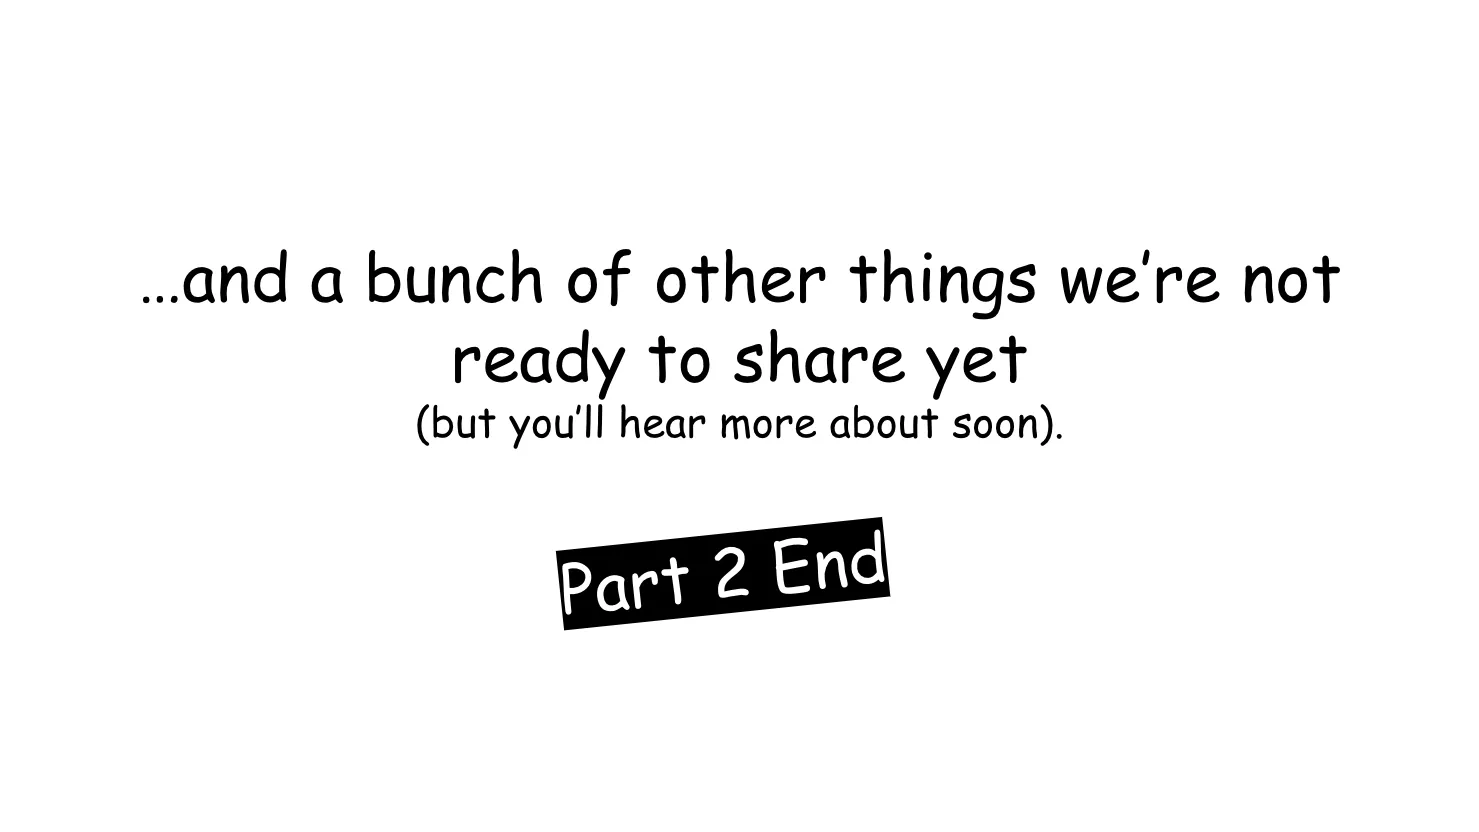 Slide 20:

…and a bunch of other things we’re not ready to share yet (but you’ll hear more about soon).

Part 2 End